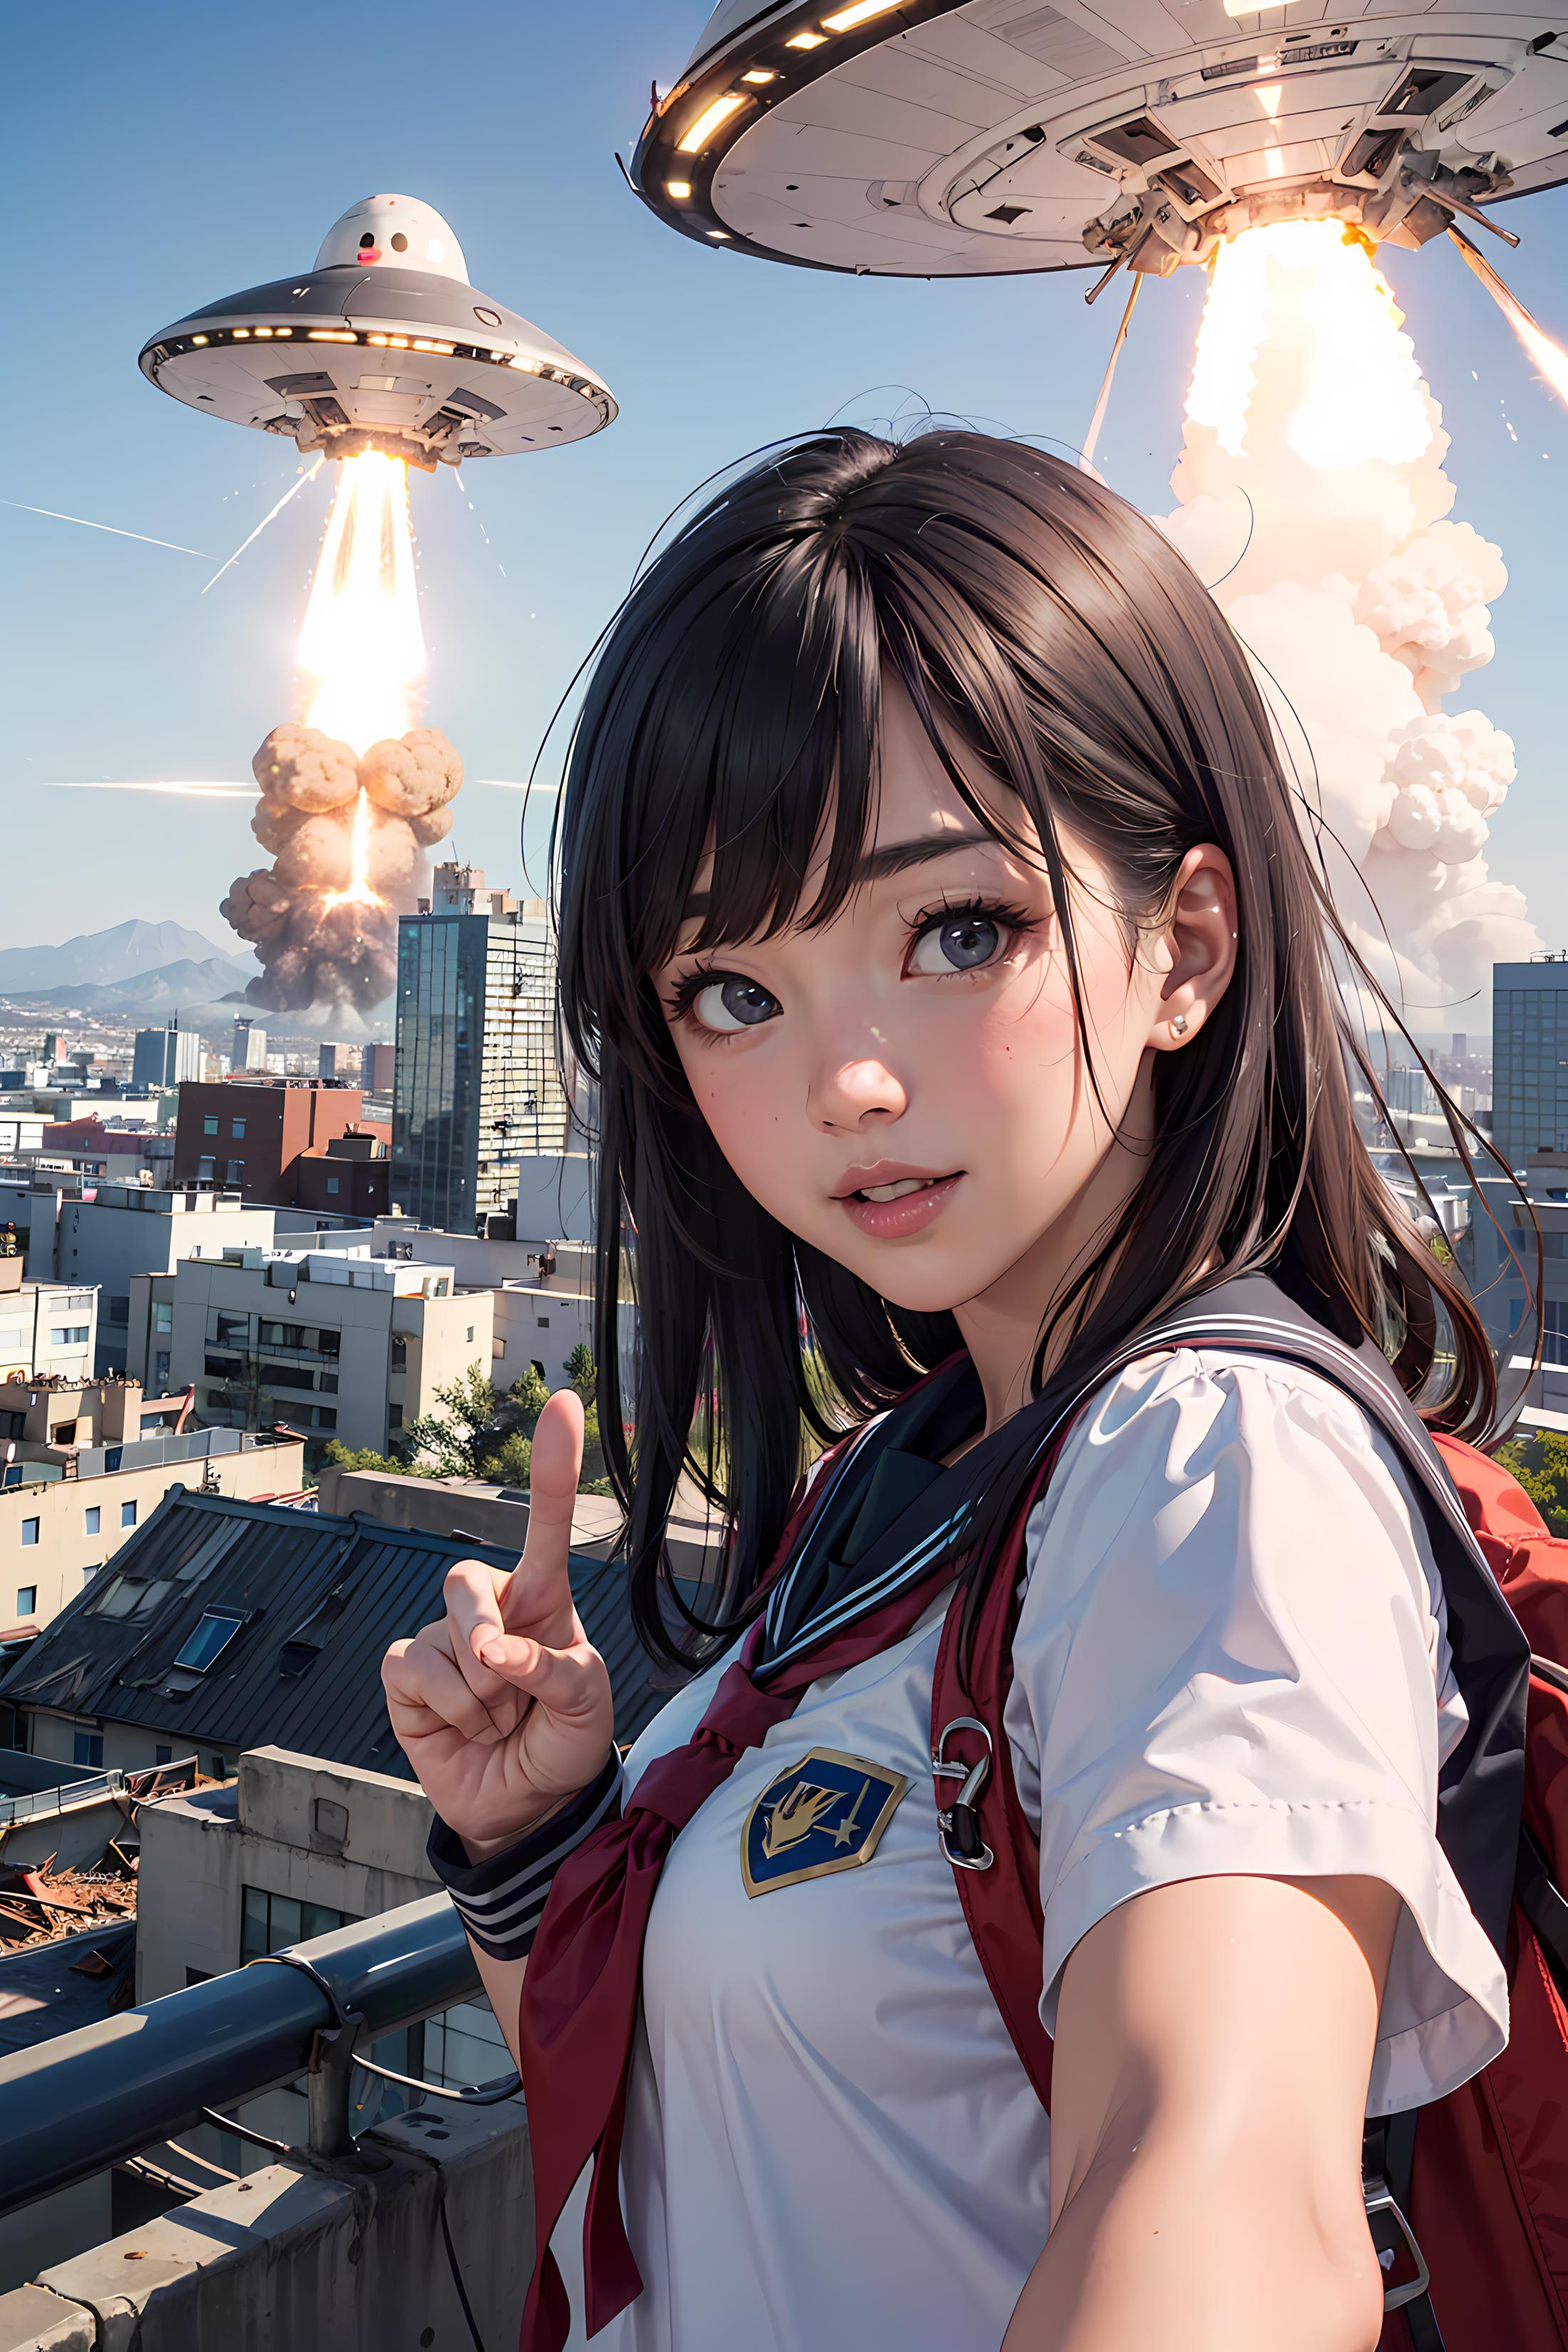 A young woman wearing a school uniform with a backpack poses in front of a city skyline with explosions and a spaceship in the background.